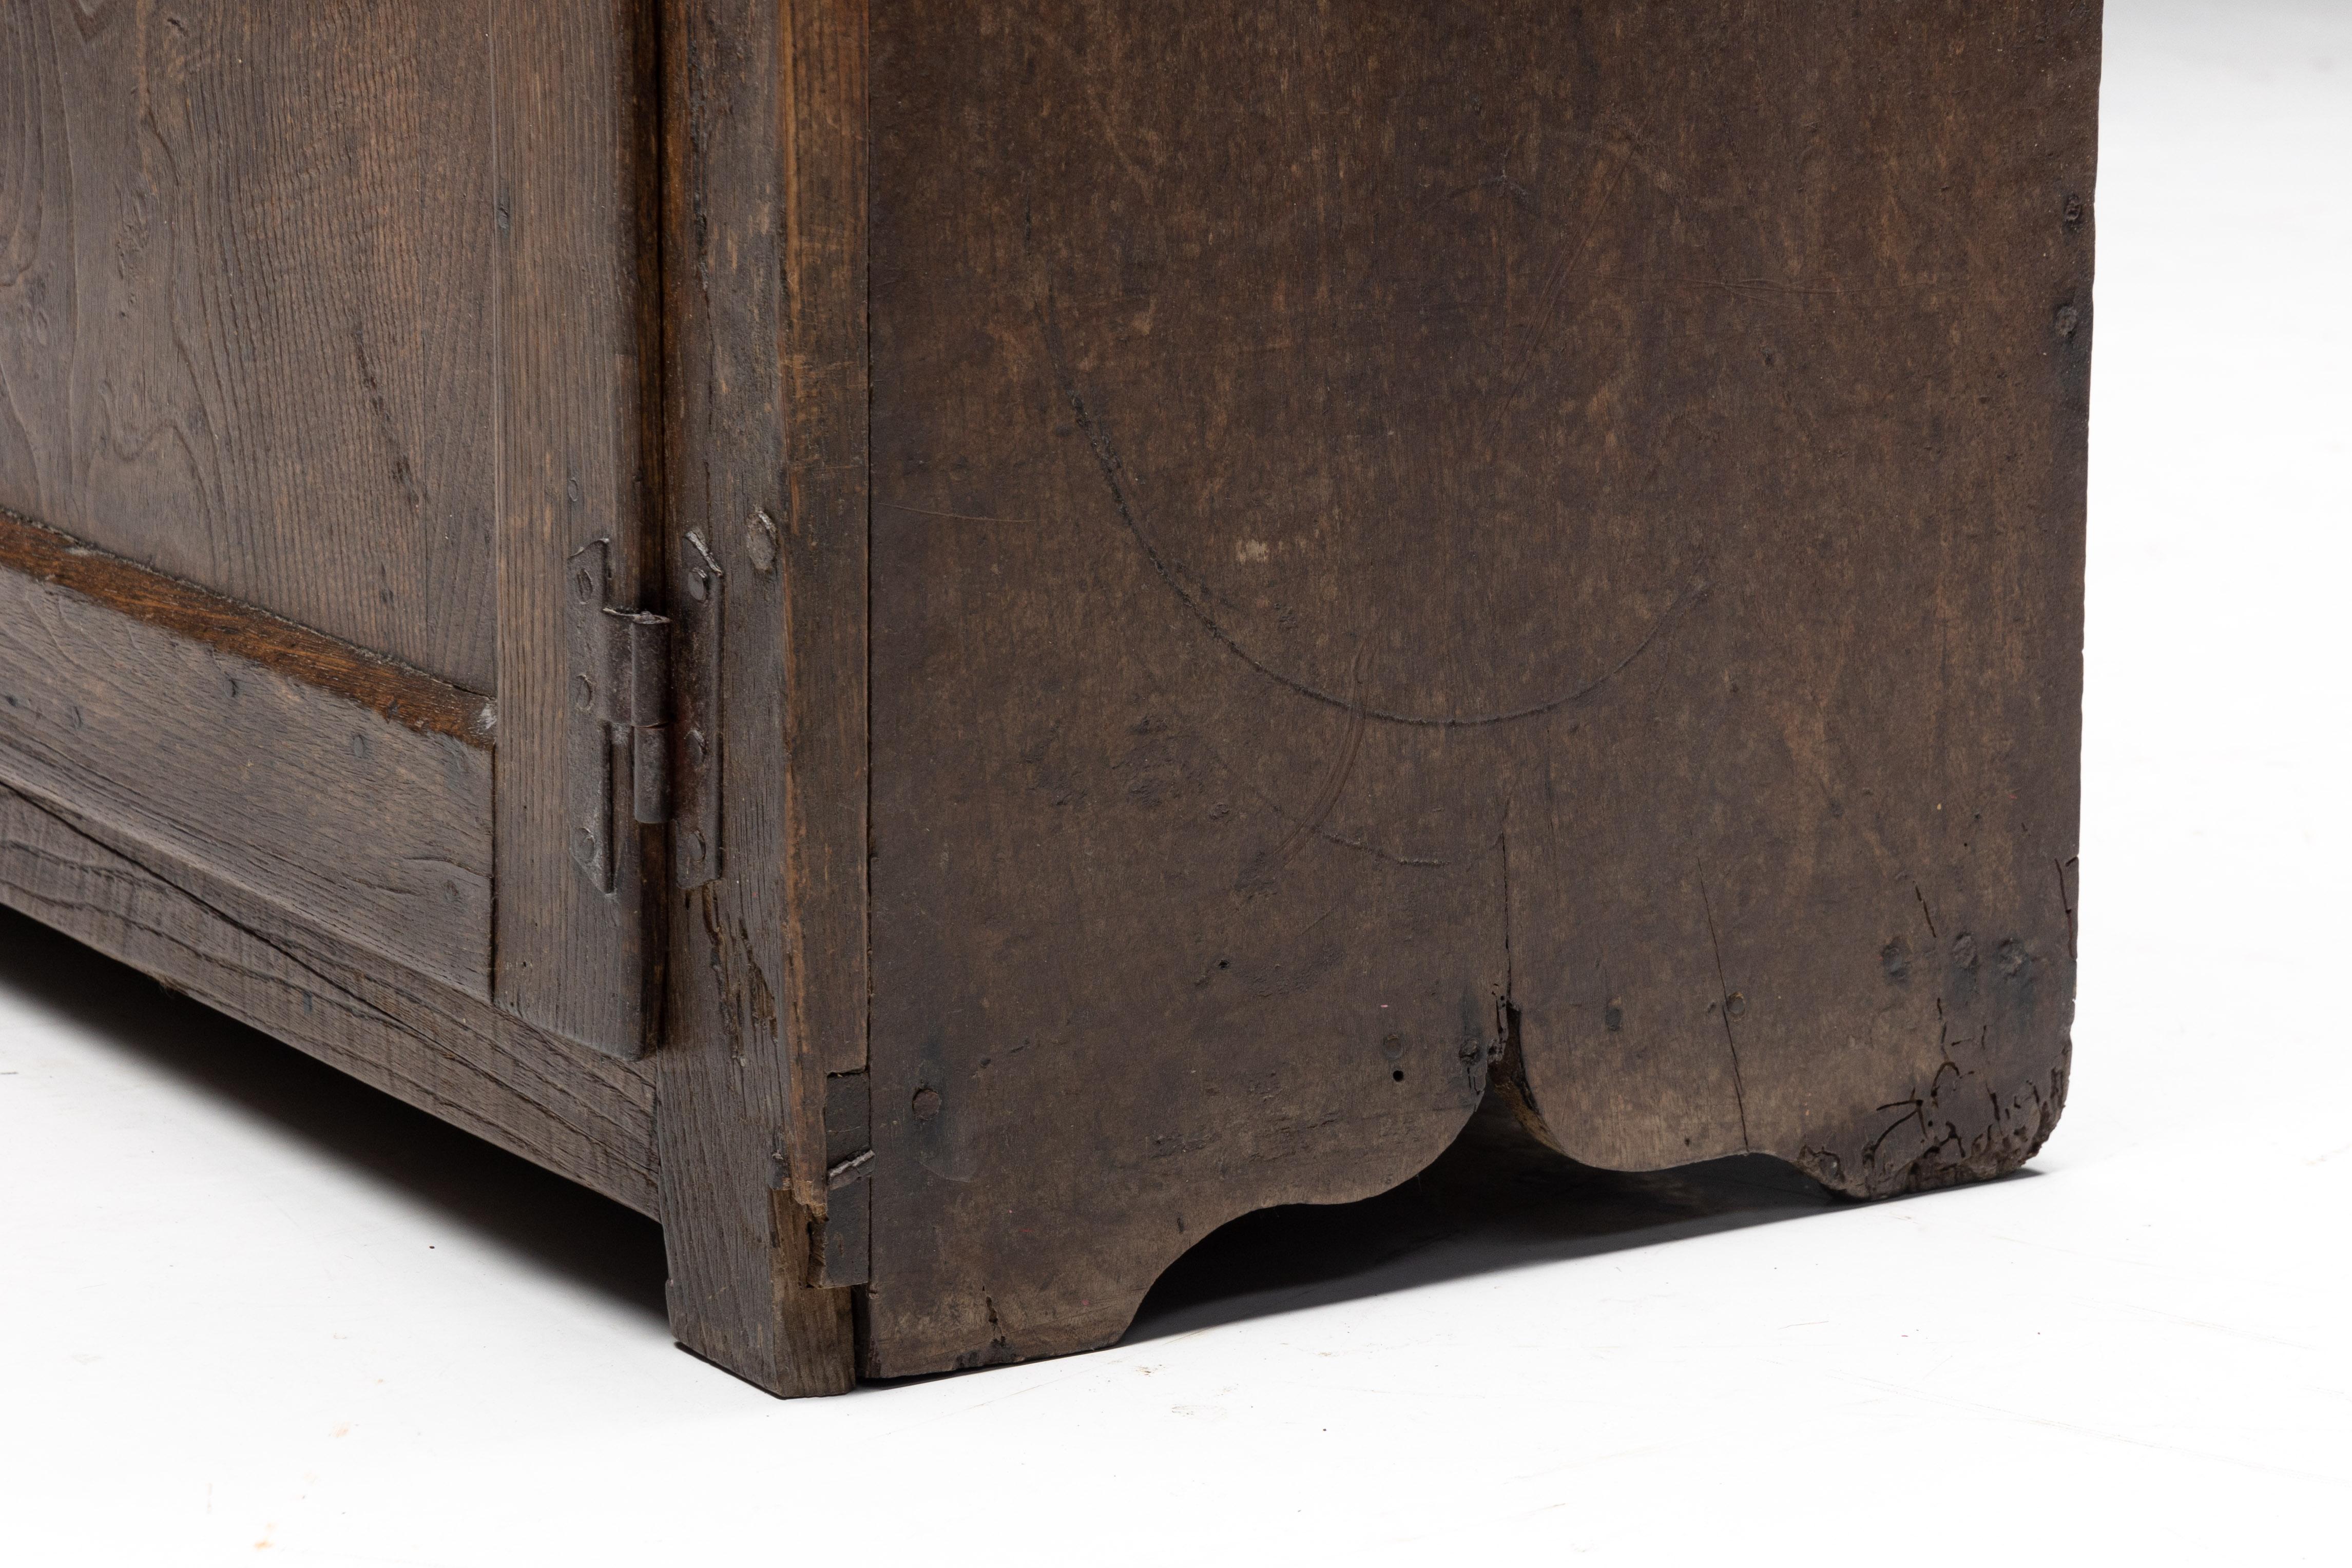 Rustic Travail Populaire Cupboard, France, Early 19th Century For Sale 9